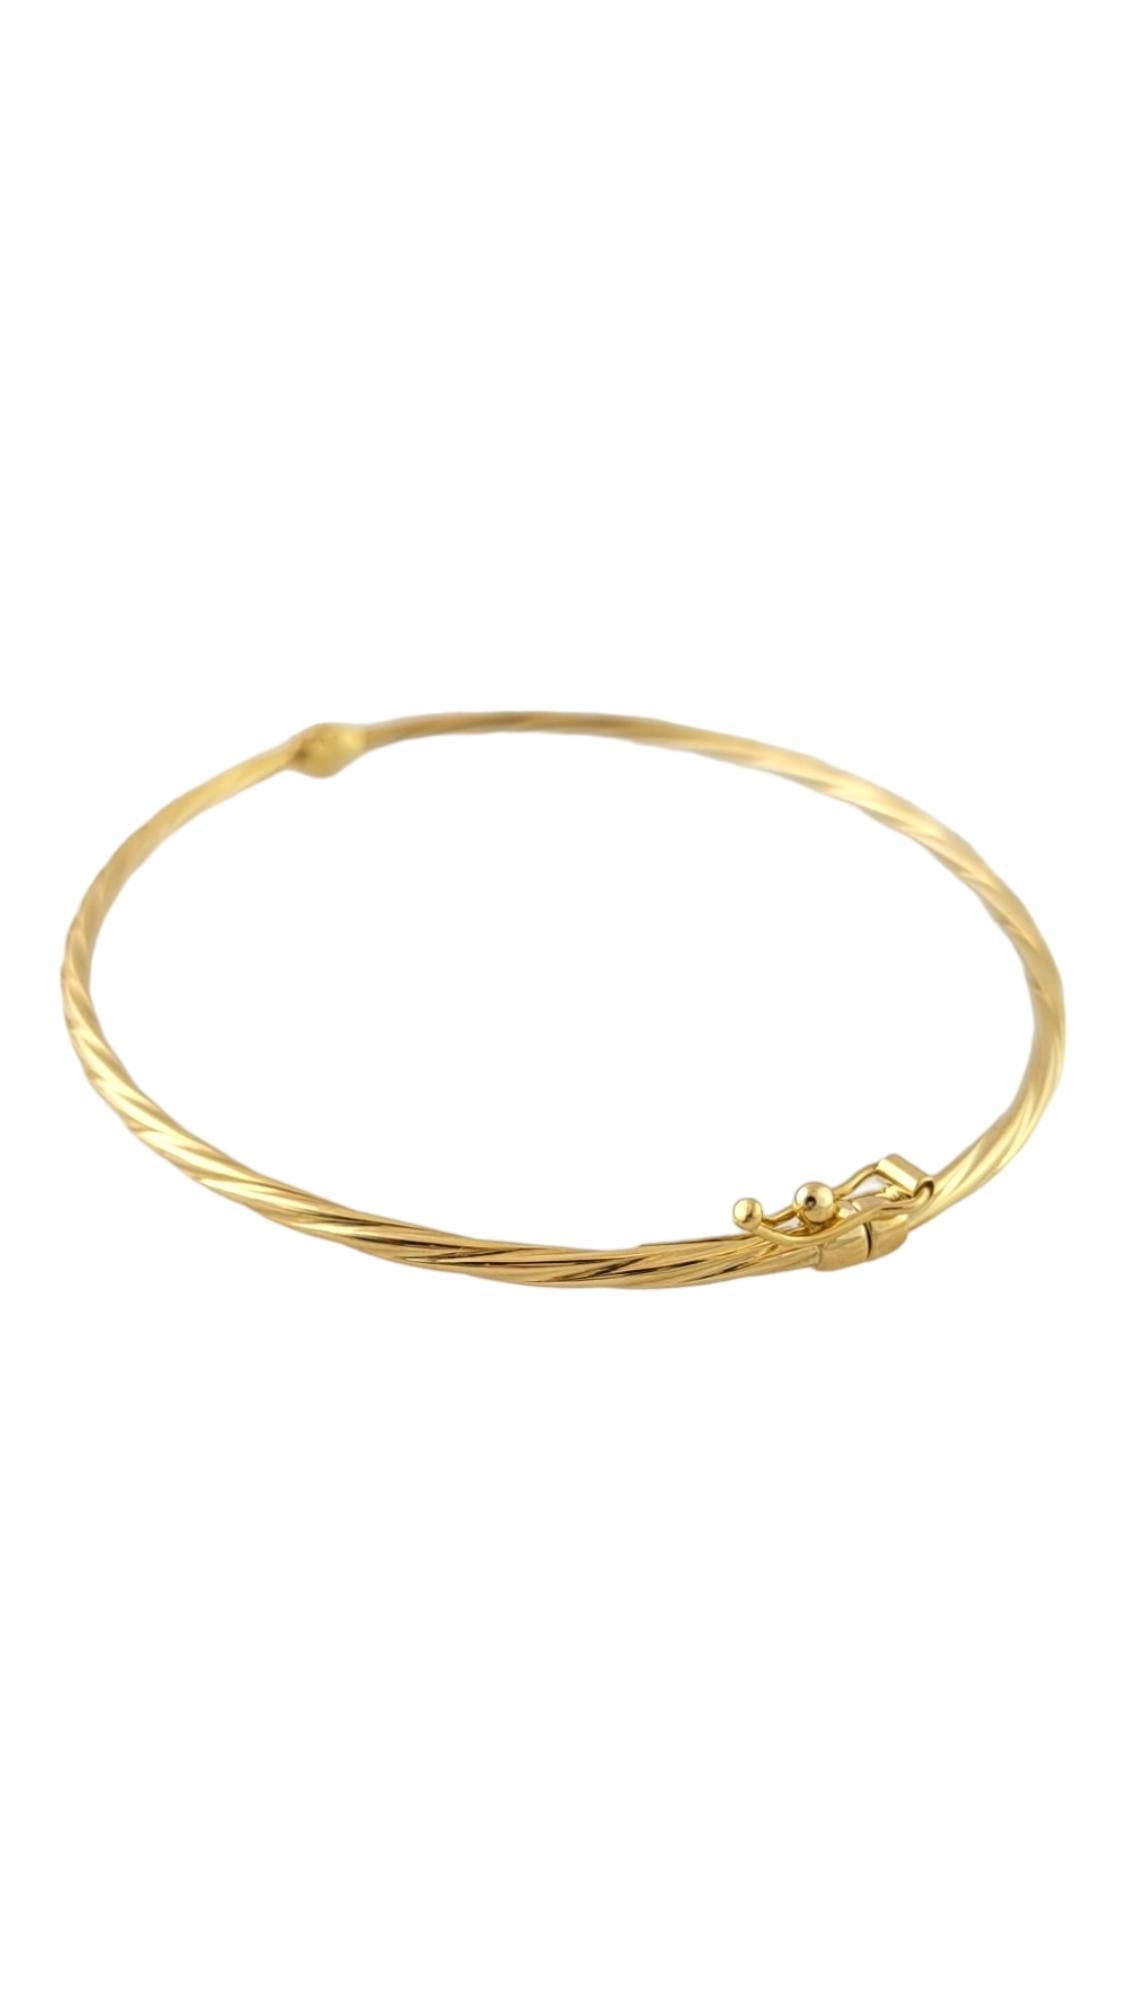 18K Yellow Gold Twisted Bangle Bracelet

This gorgeous 18K yellow gold twisted bangle bracelet has a simple yet beautiful look that will look amazing on anyone!

Size: 6.5